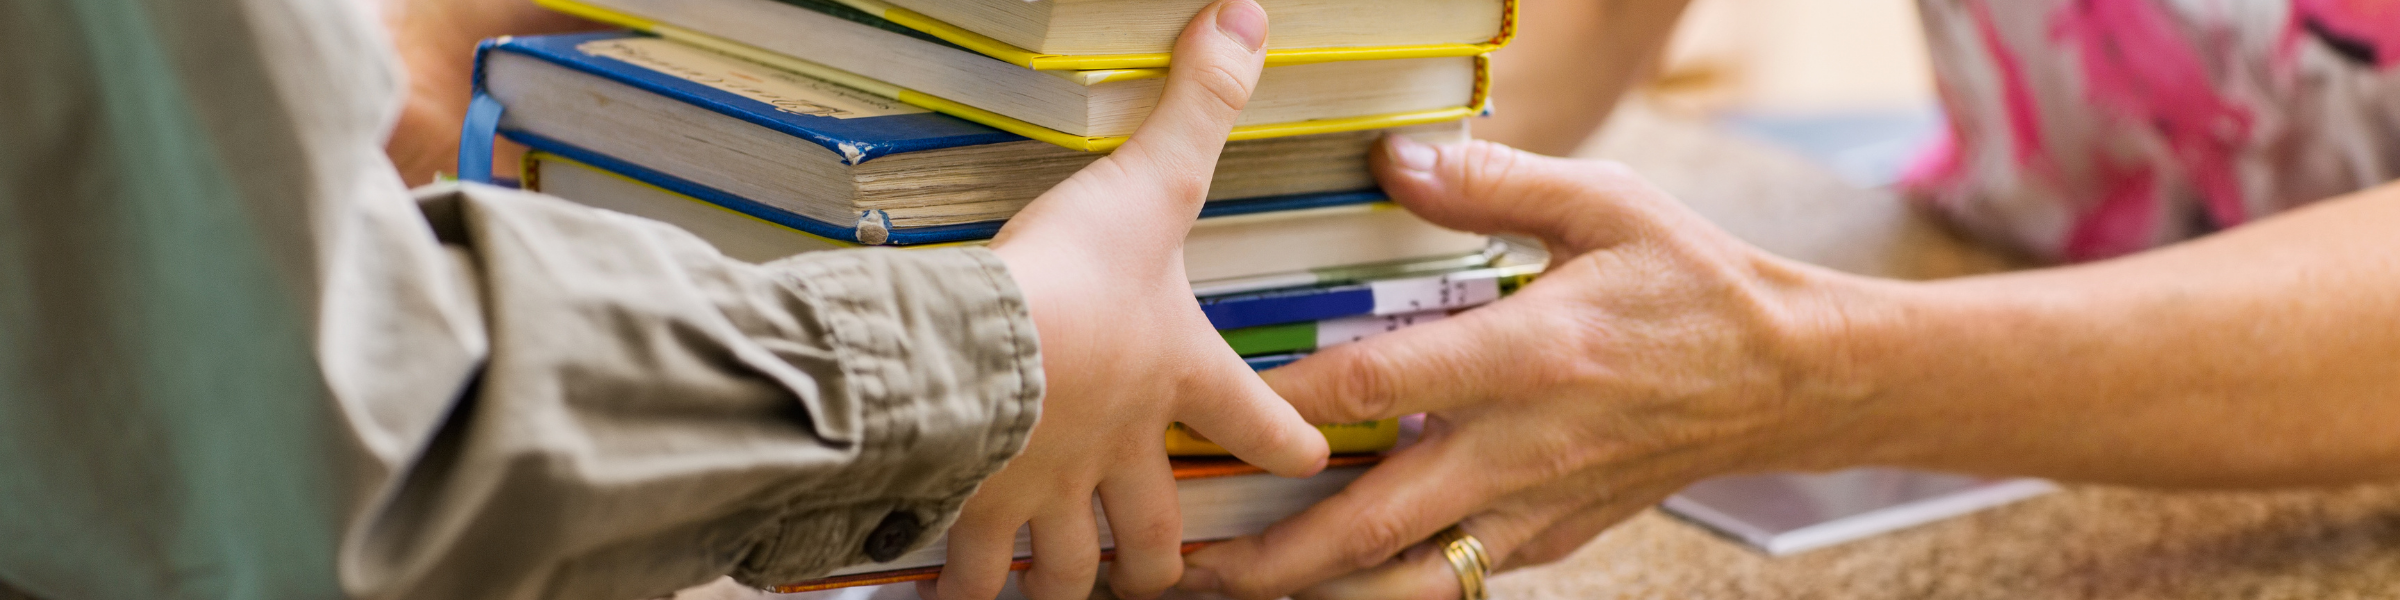 Borrowing Guidelines header showing librarian handing patron a stack of books